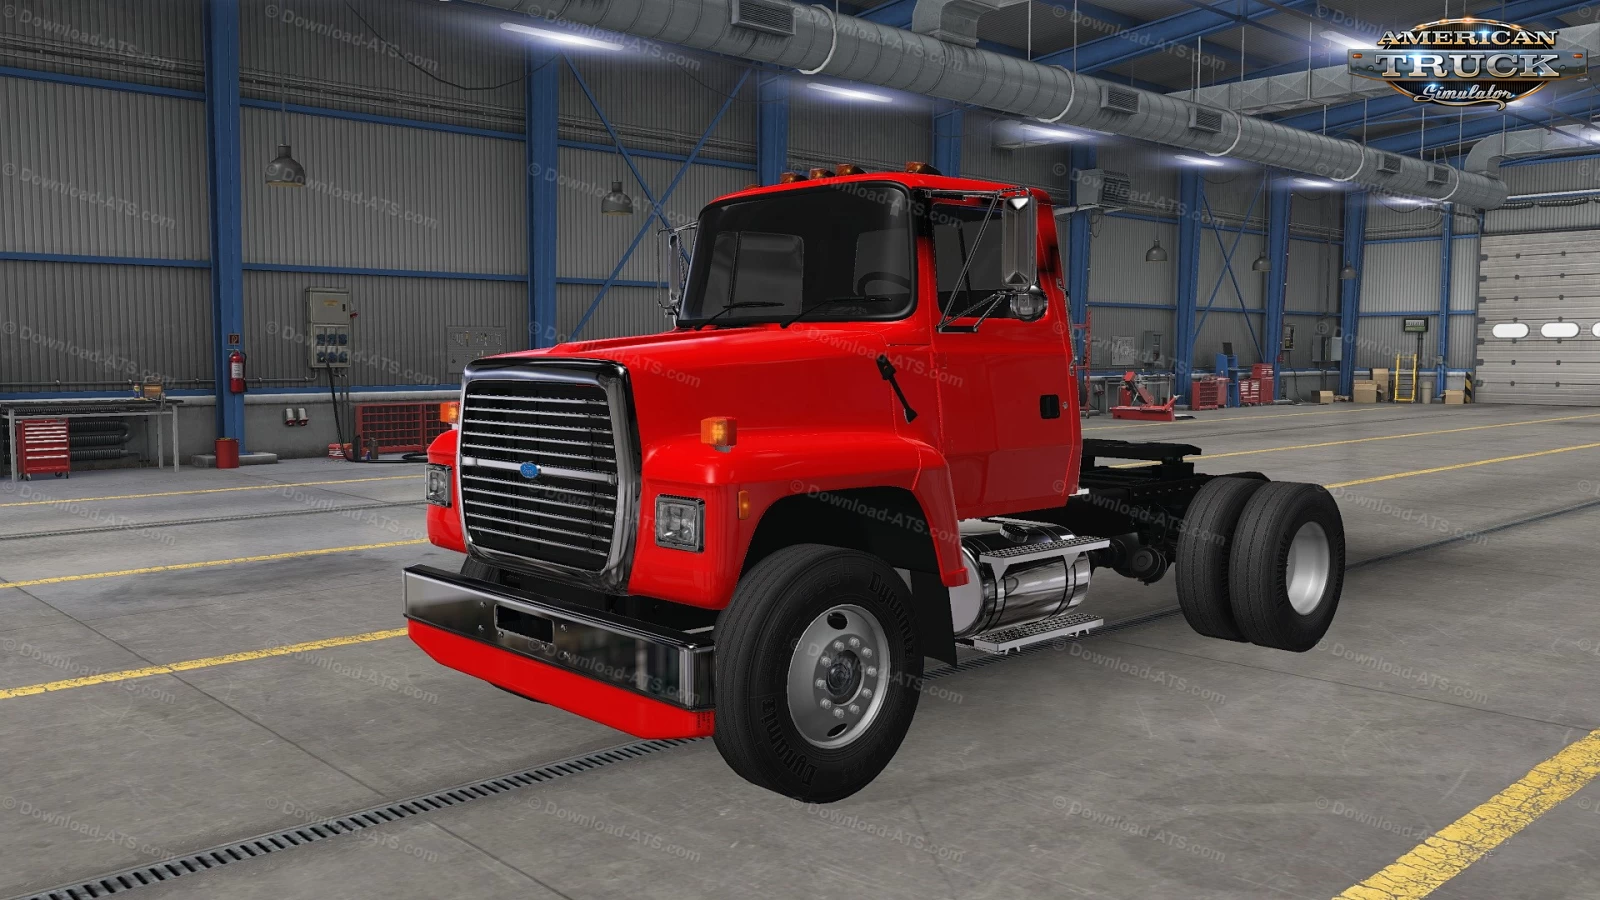 Ford L-Series Custom v1.4 by ReneNate (1.45.x) for ATS